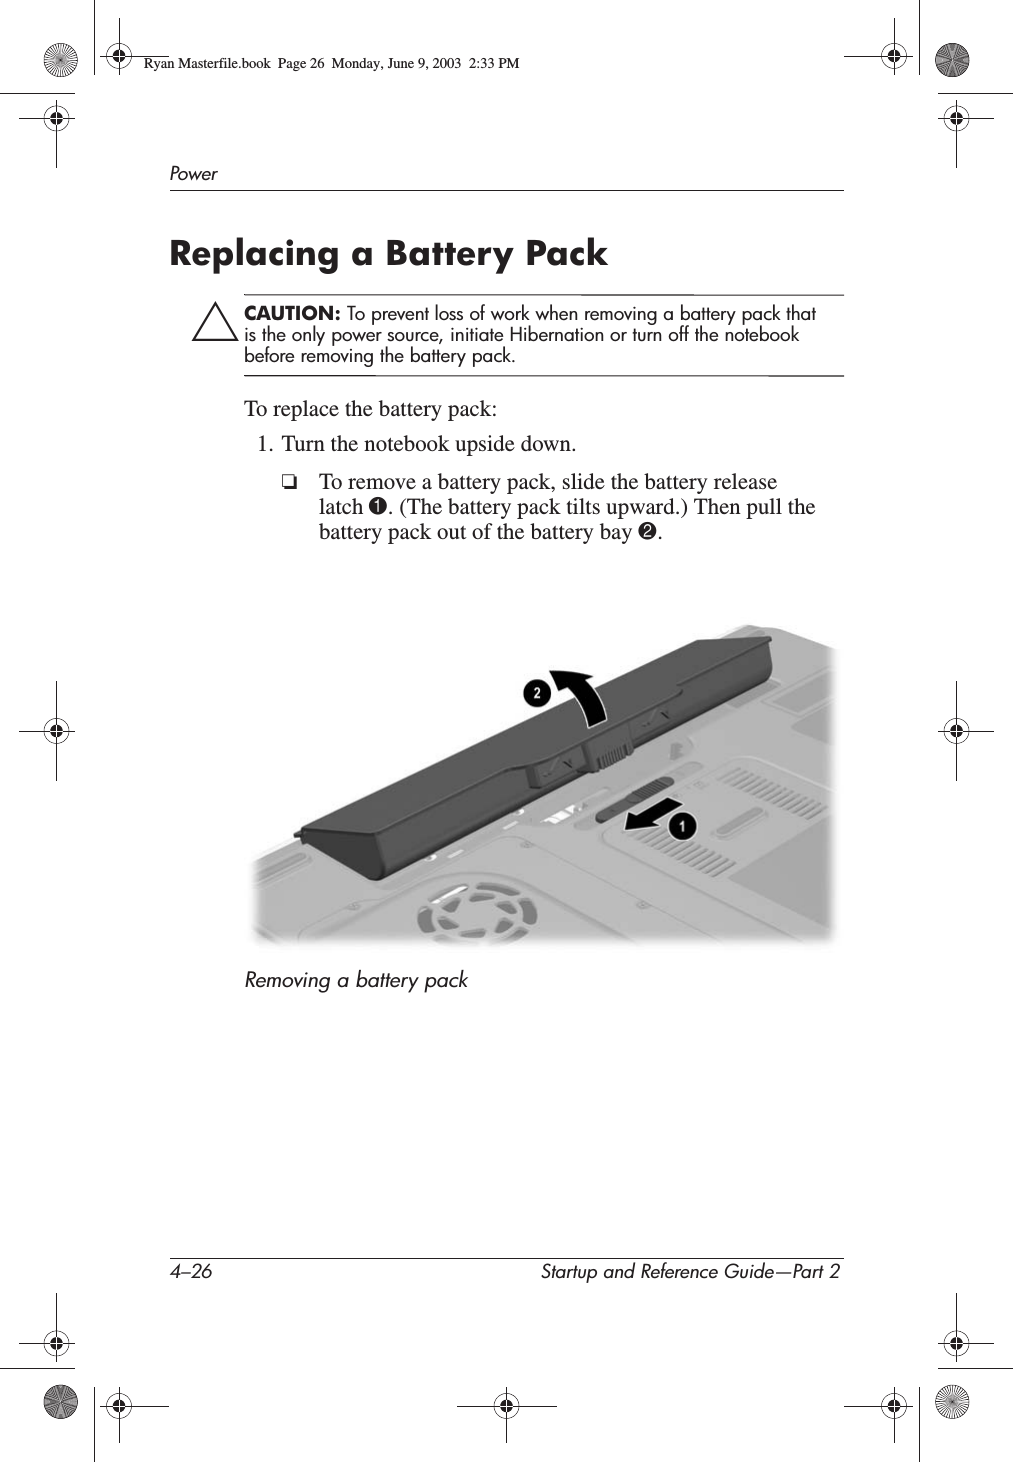 4–26 Startup and Reference Guide—Part 2PowerReplacing a Battery PackÄCAUTION: To prevent loss of work when removing a battery pack that is the only power source, initiate Hibernation or turn off the notebook before removing the battery pack.To replace the battery pack:1. Turn the notebook upside down.❏To remove a battery pack, slide the battery release latch 1. (The battery pack tilts upward.) Then pull the battery pack out of the battery bay 2.Removing a battery packRyan Masterfile.book  Page 26  Monday, June 9, 2003  2:33 PM